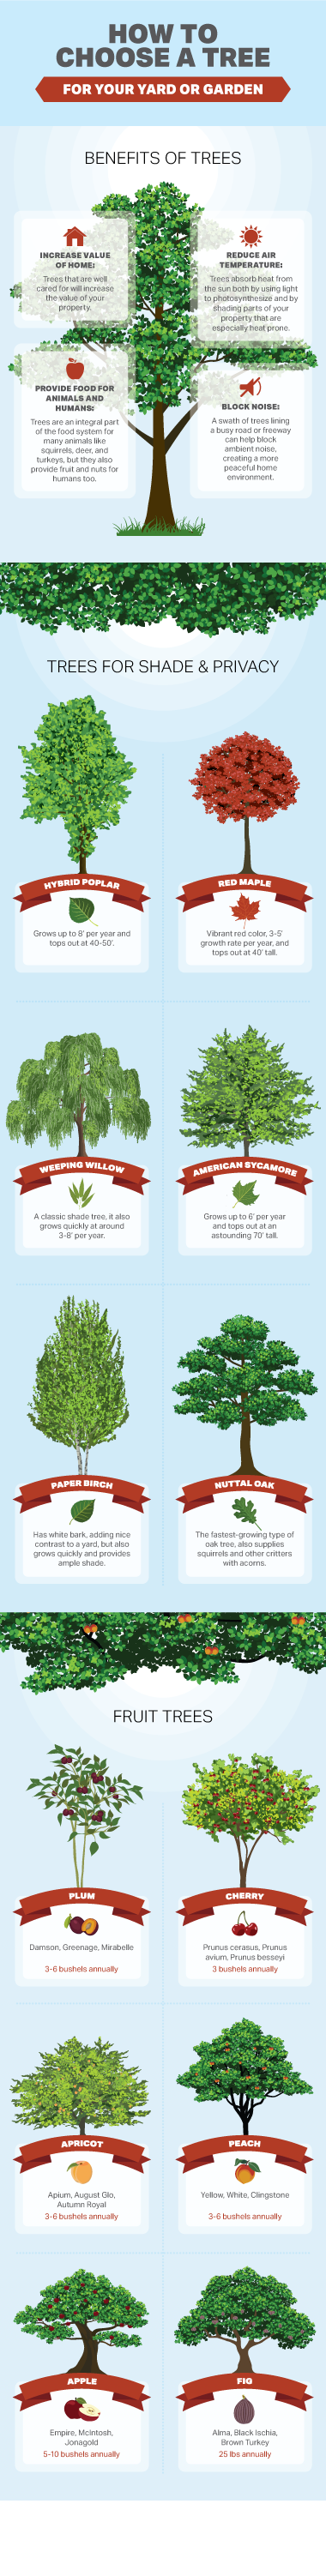 How to Choose a Tree For Your Yard or Garden